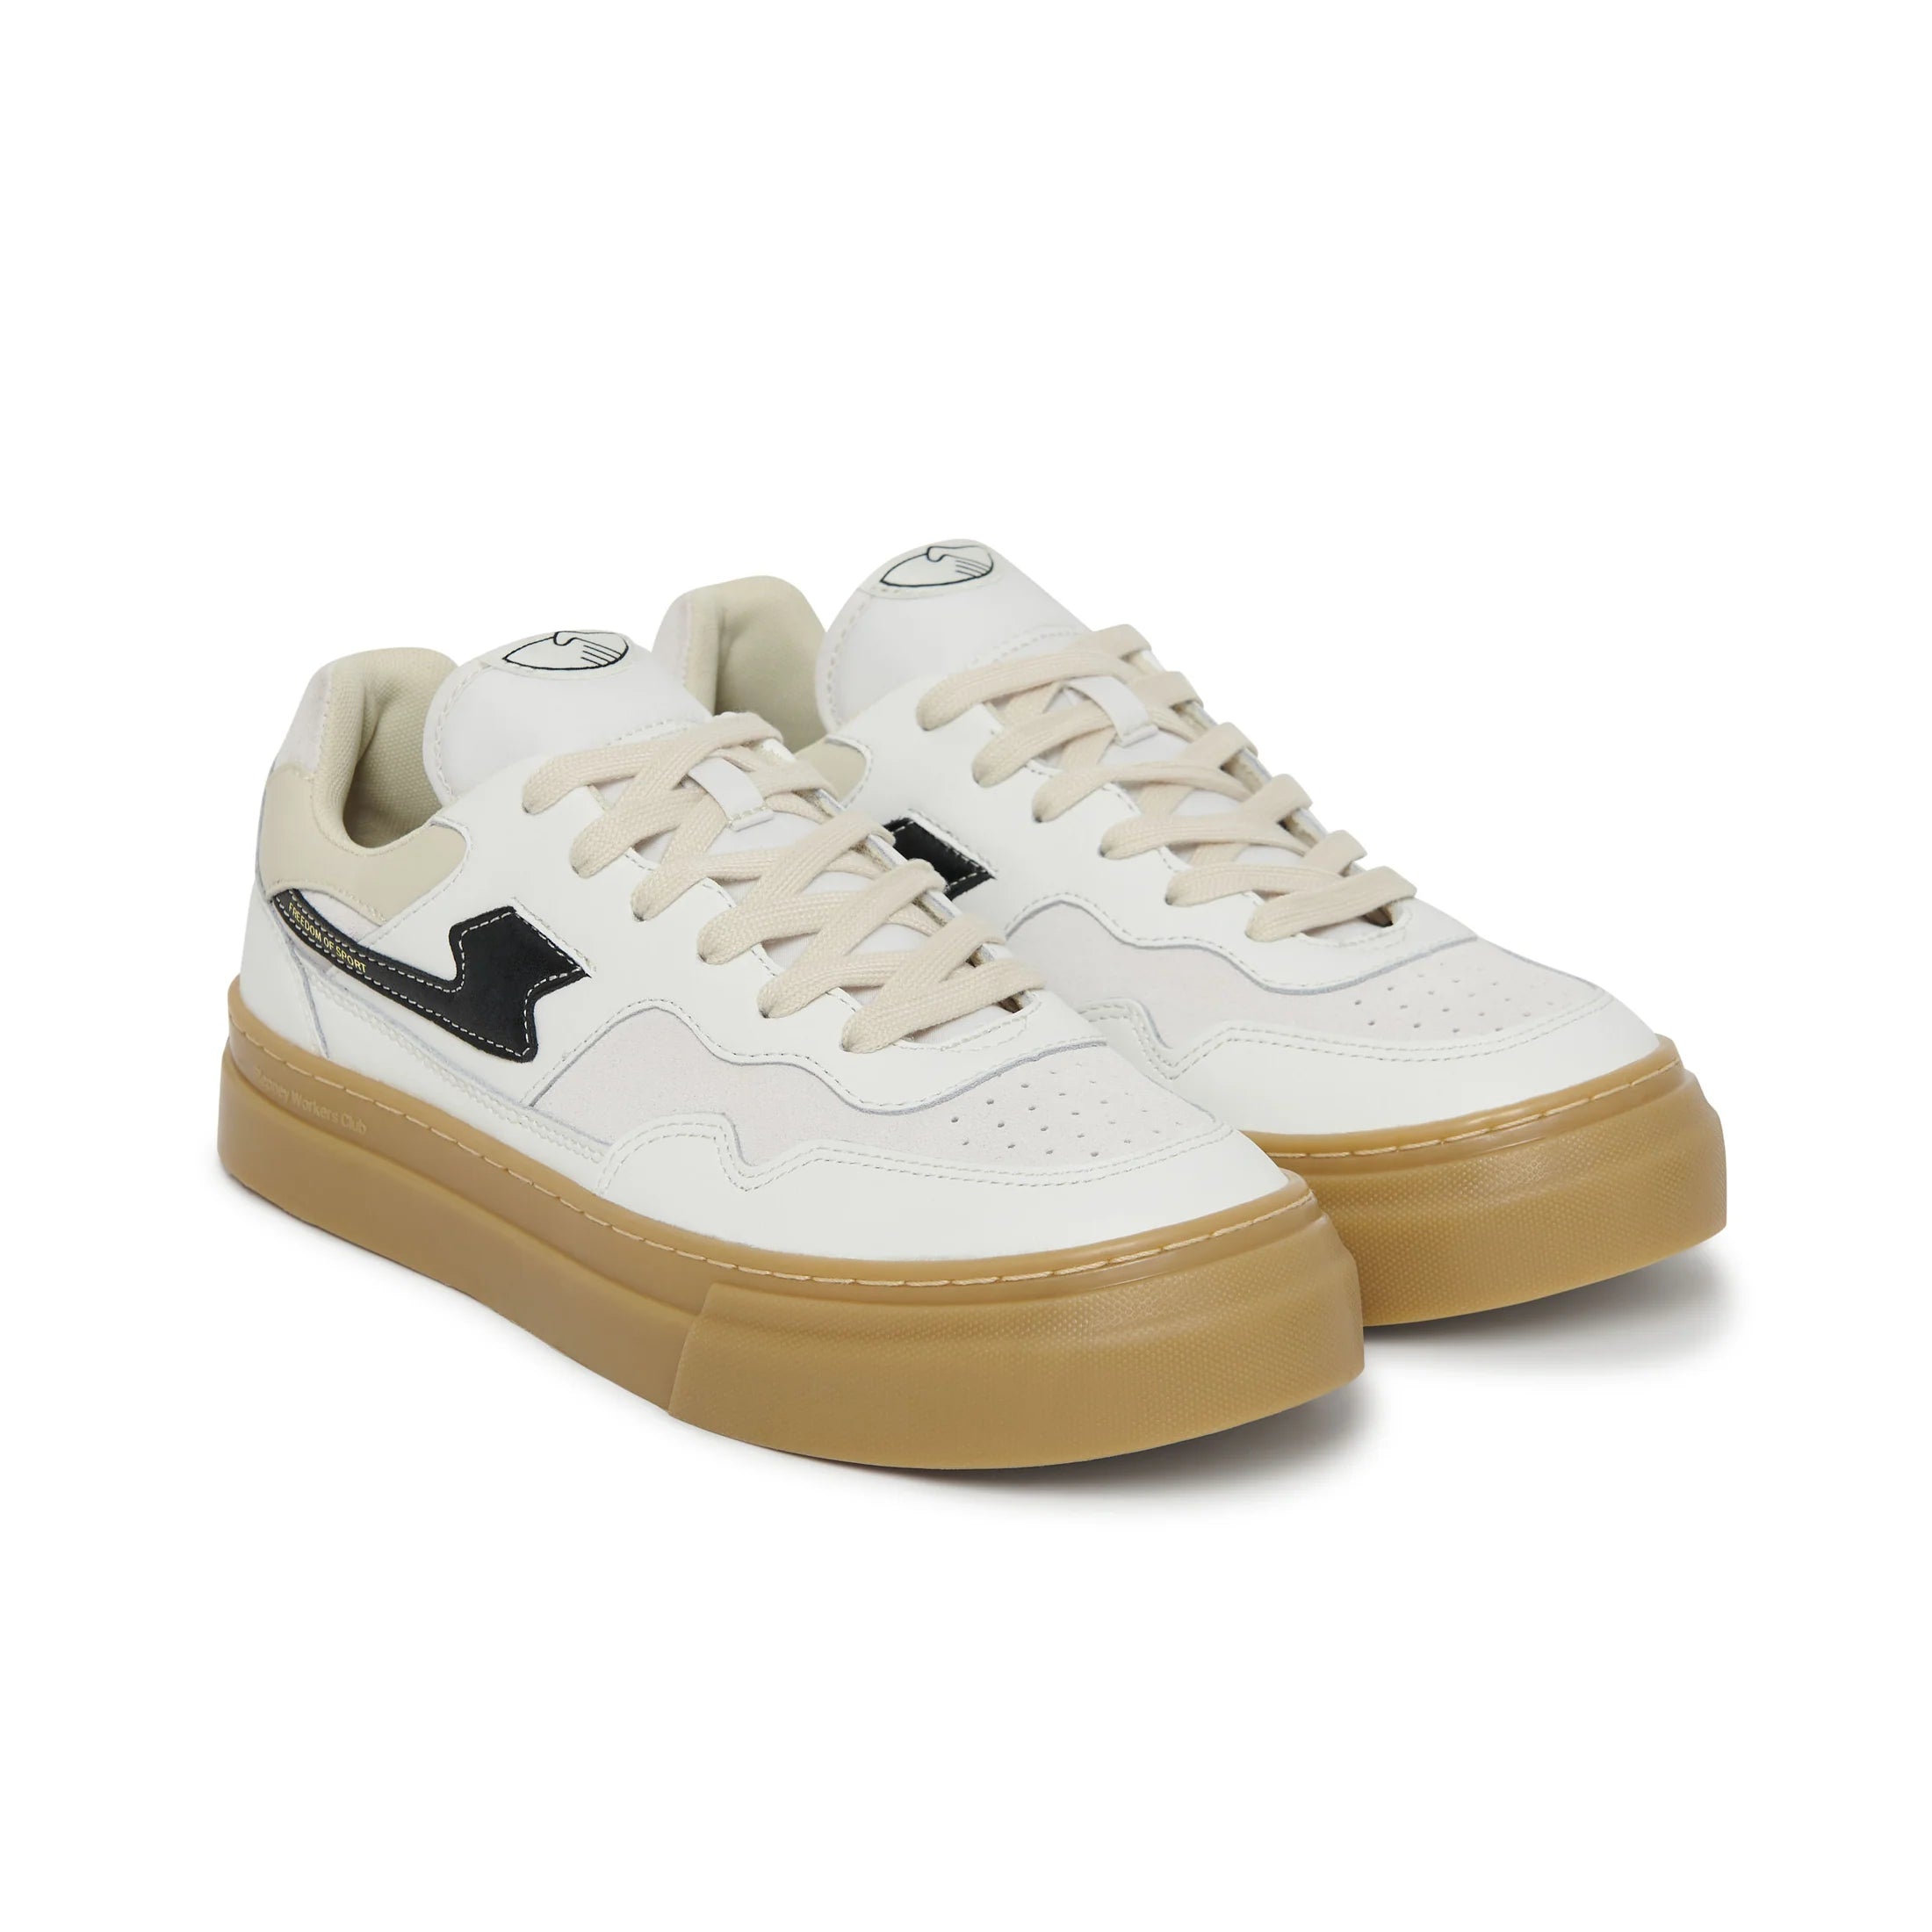 PEARL S-STRIKE LEATHER MIX M - WHITE GUM